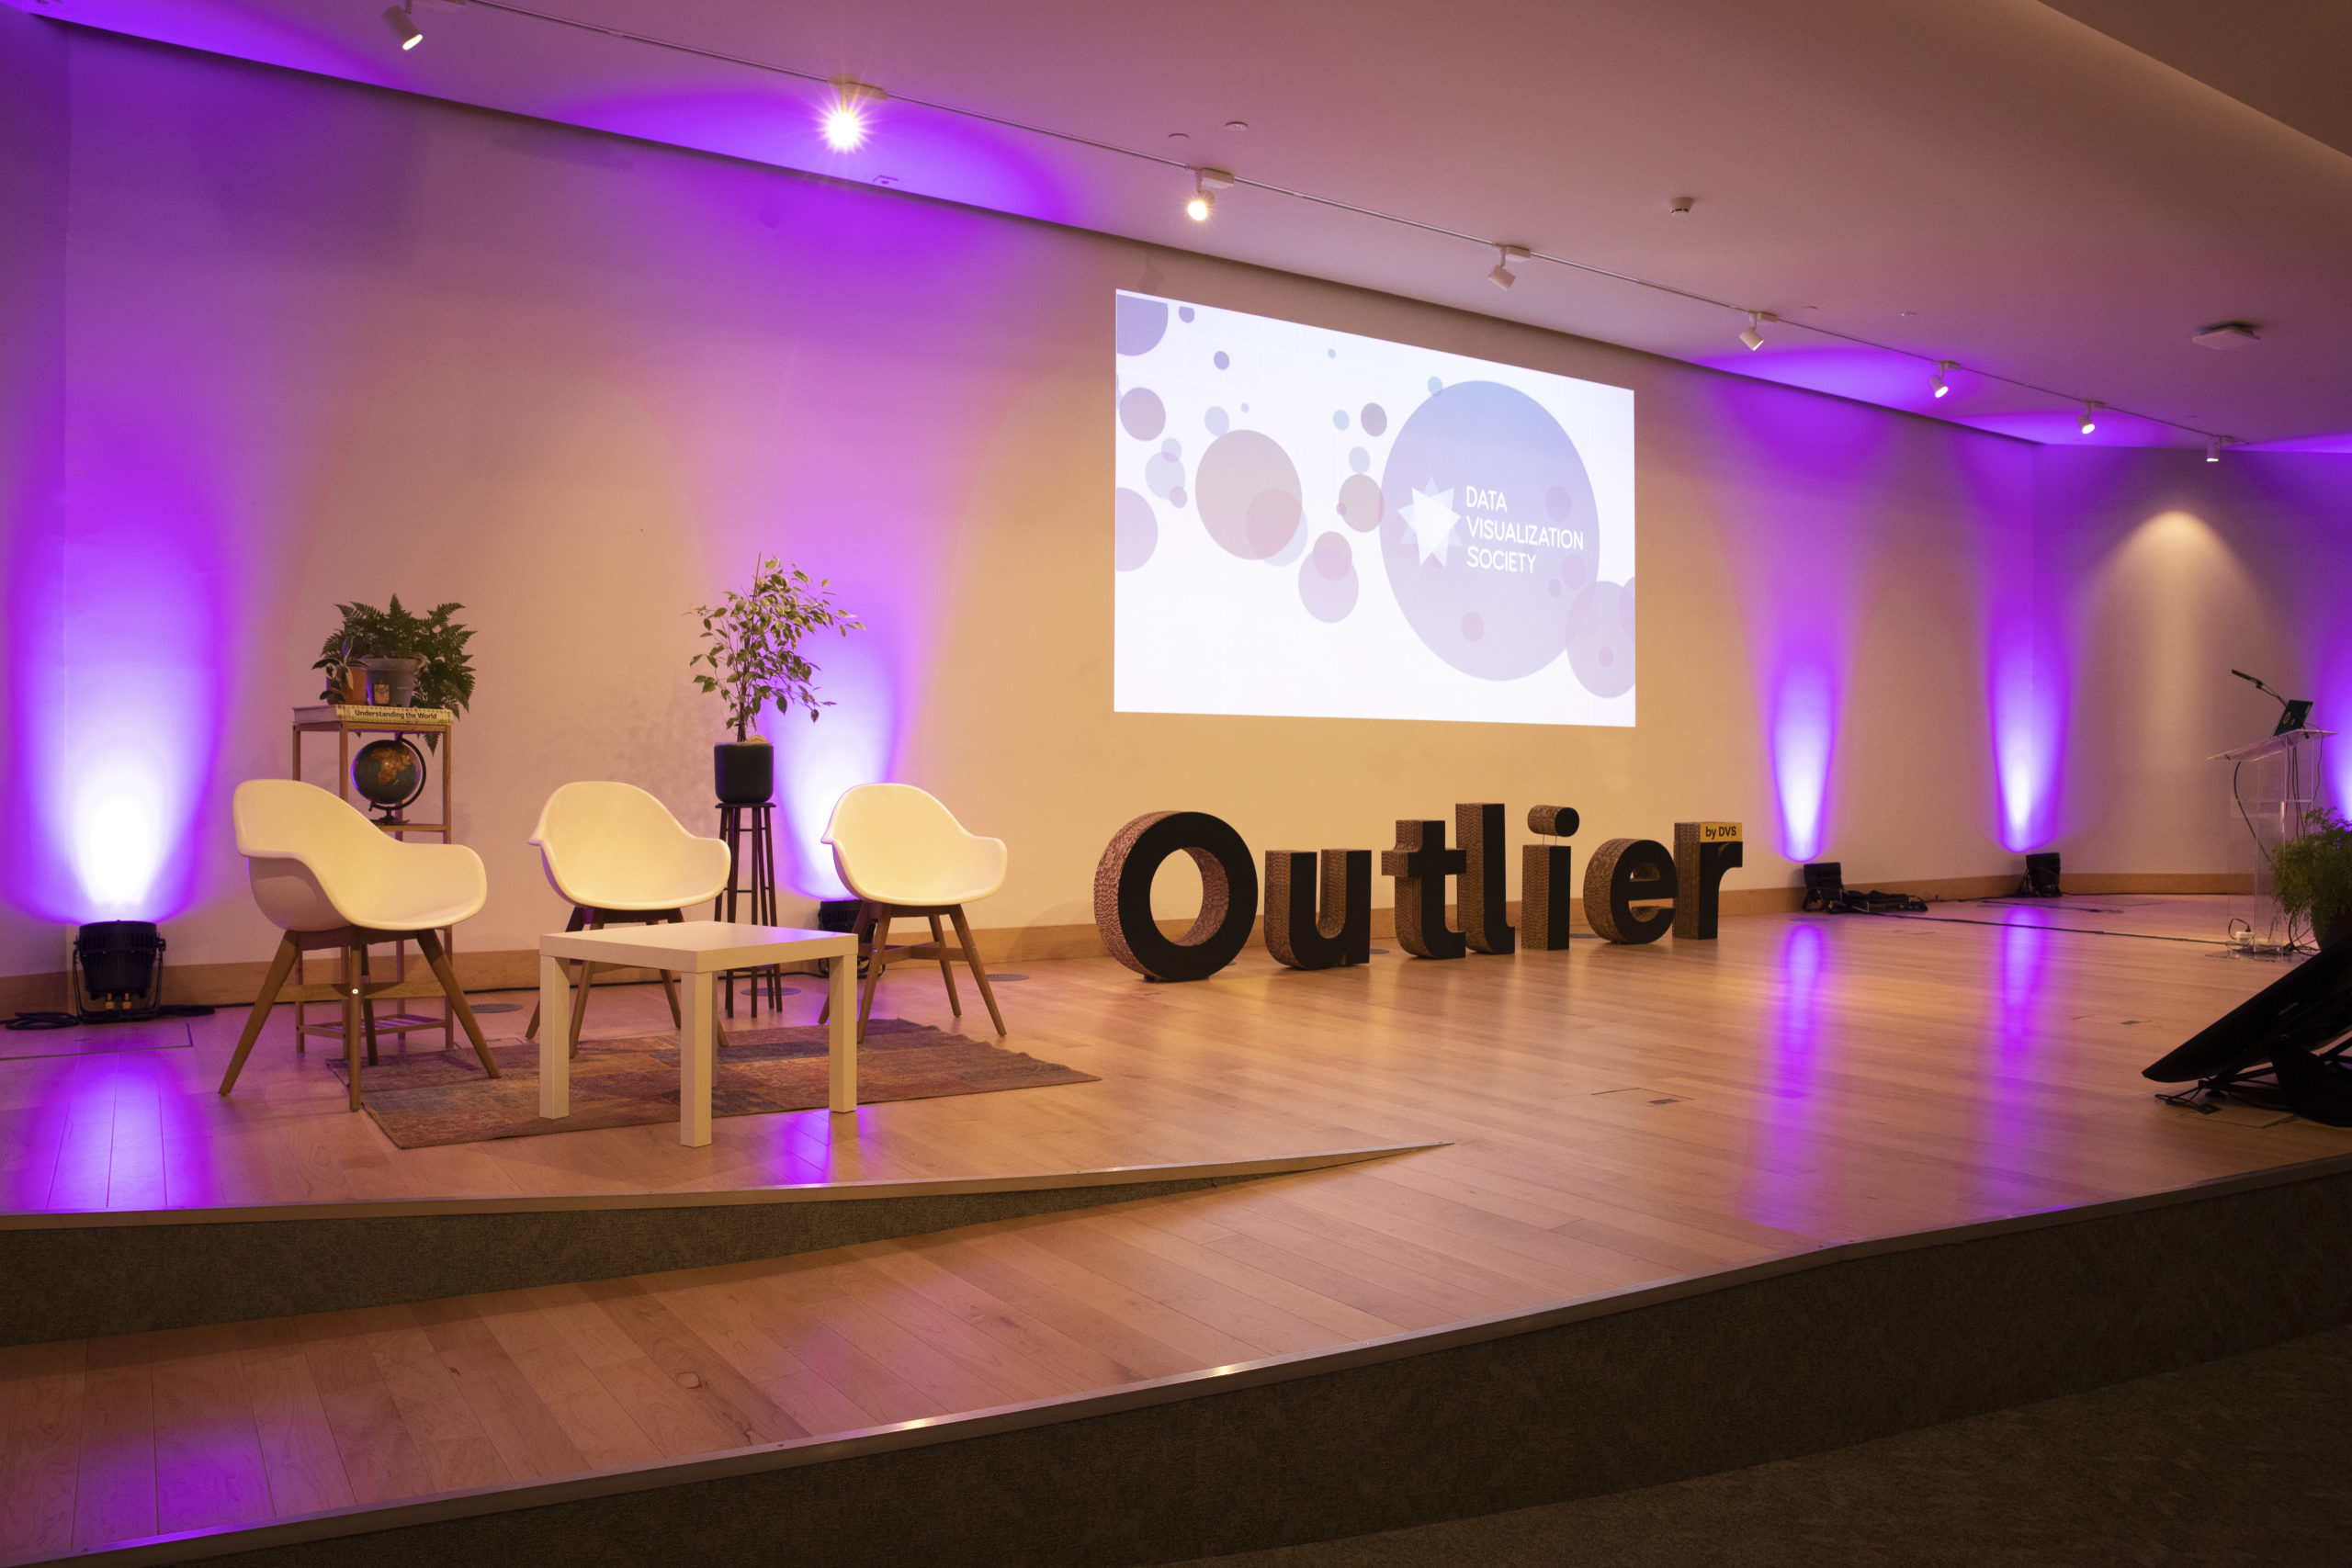 A photo of the Outlier presentation stage in Porto, with a projector screen three chairs, a podium and an physical "Outlier" letter blocks set on the floor.